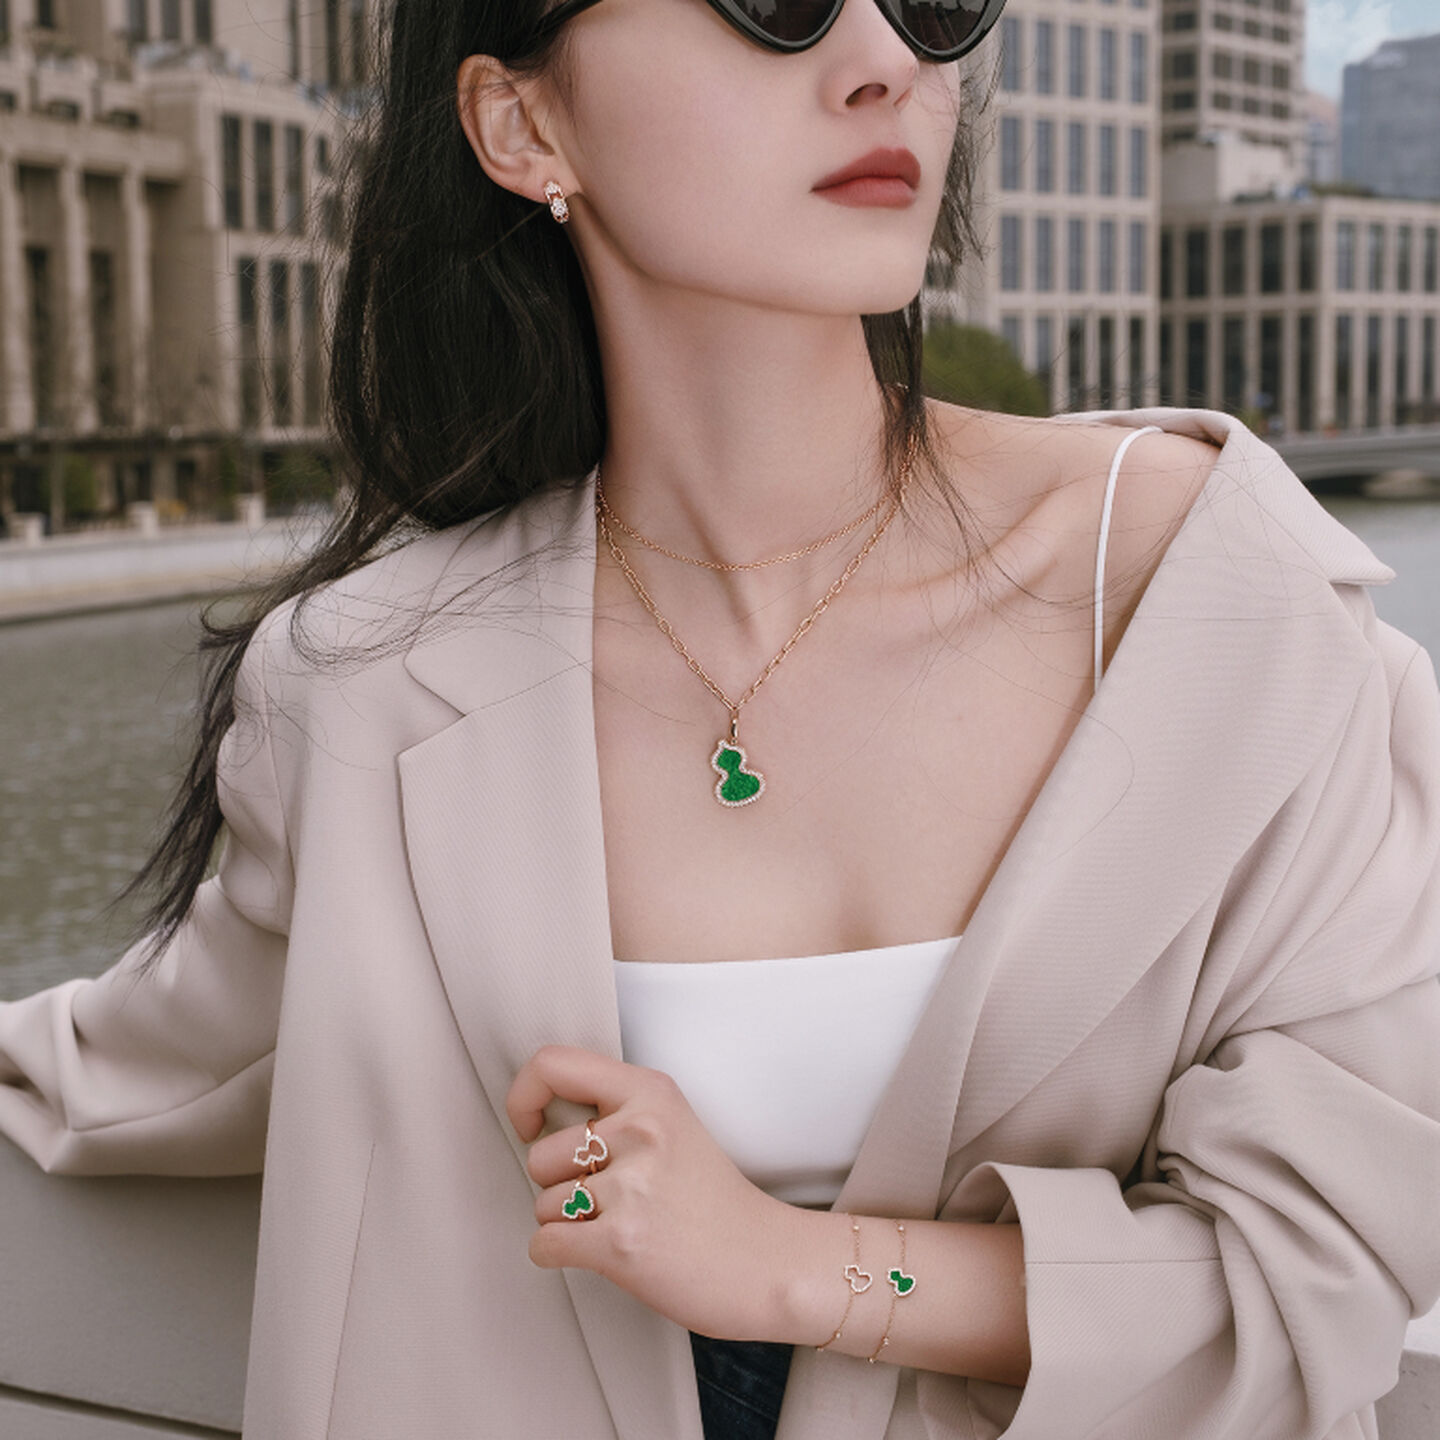 A woman wearing a Qeelin Wulu gold and jade pendant in the city.